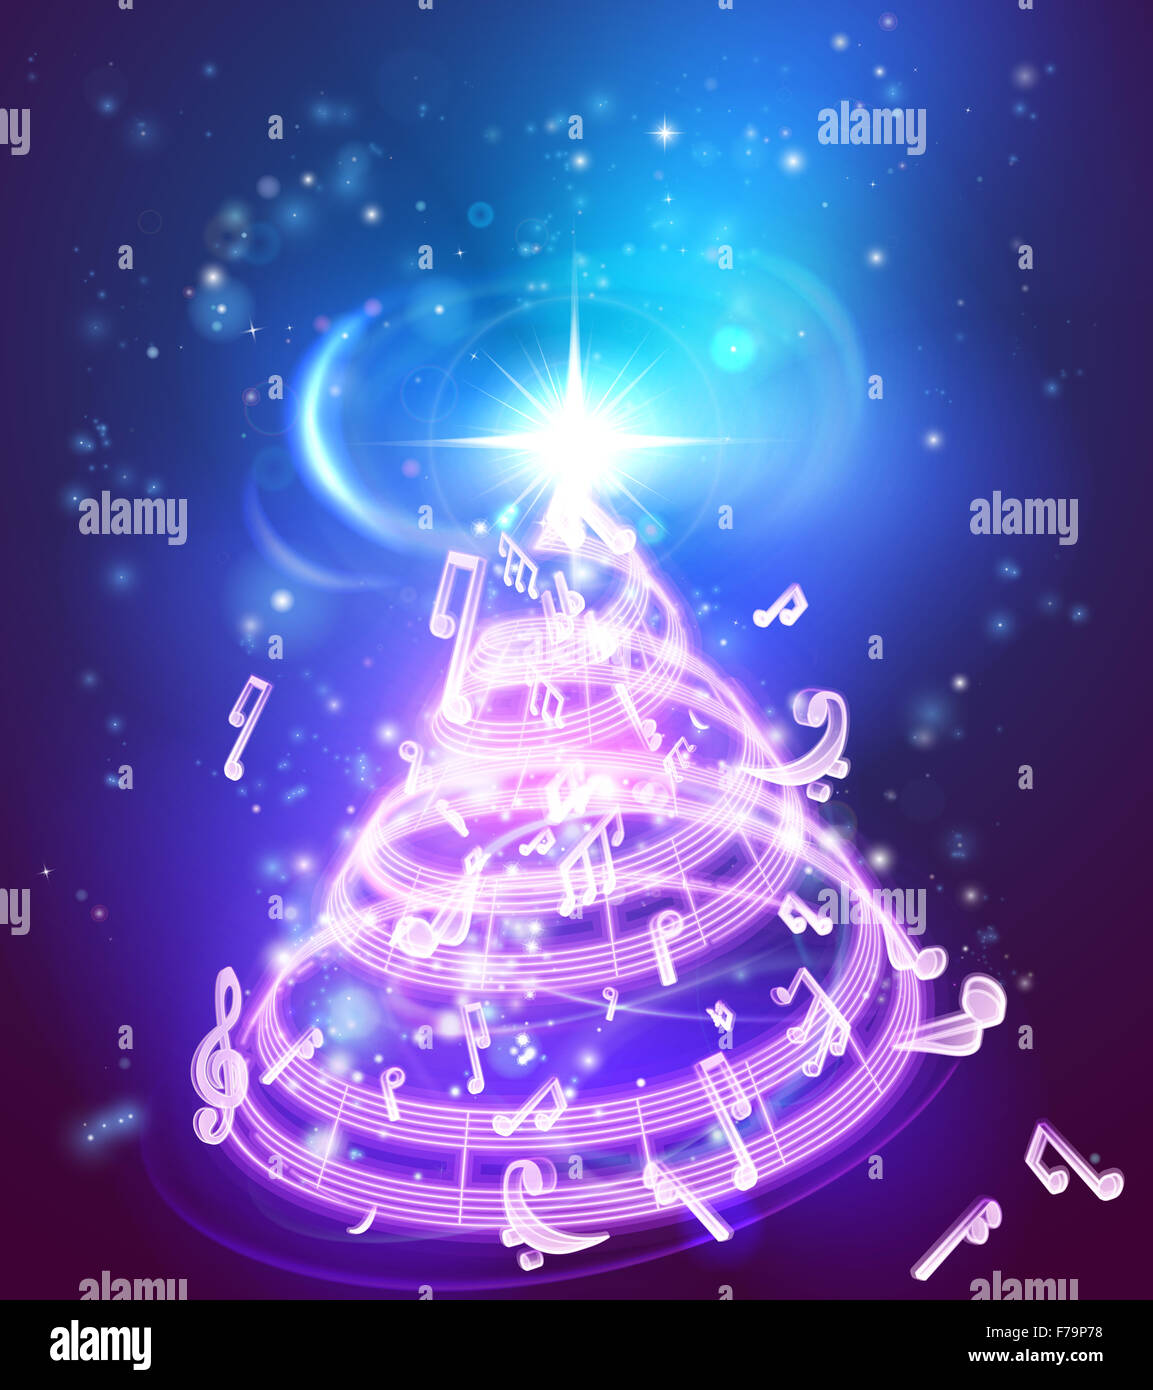 A magic music musical notes Christmas tree background illustration of a holiday Christmas tree made up of musical notes Stock Photo